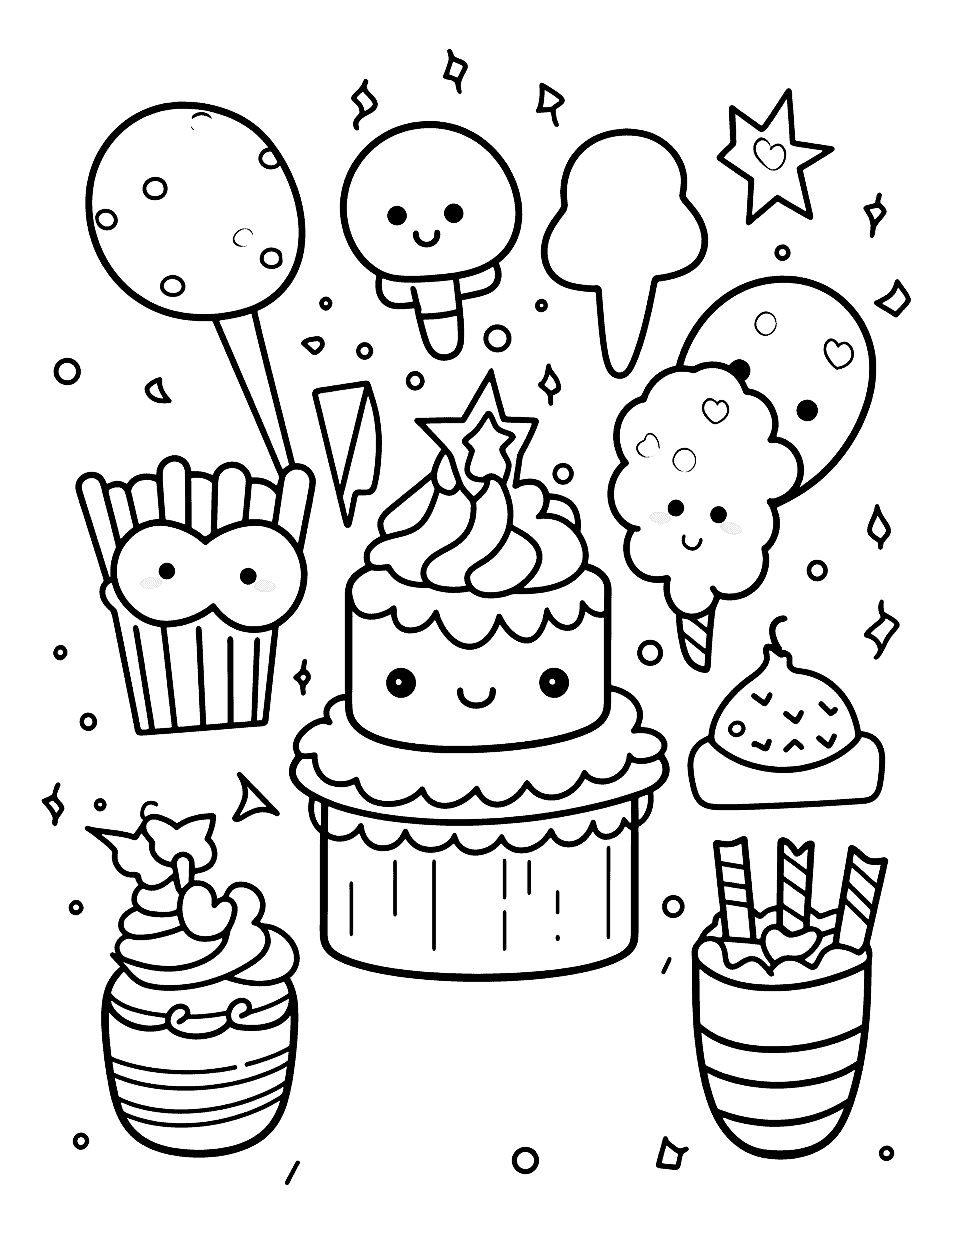 Kawaii Birthday Treats Happy Coloring Page - A collection of cute, kawaii-style birthday items, like a cake, presents, and balloons.